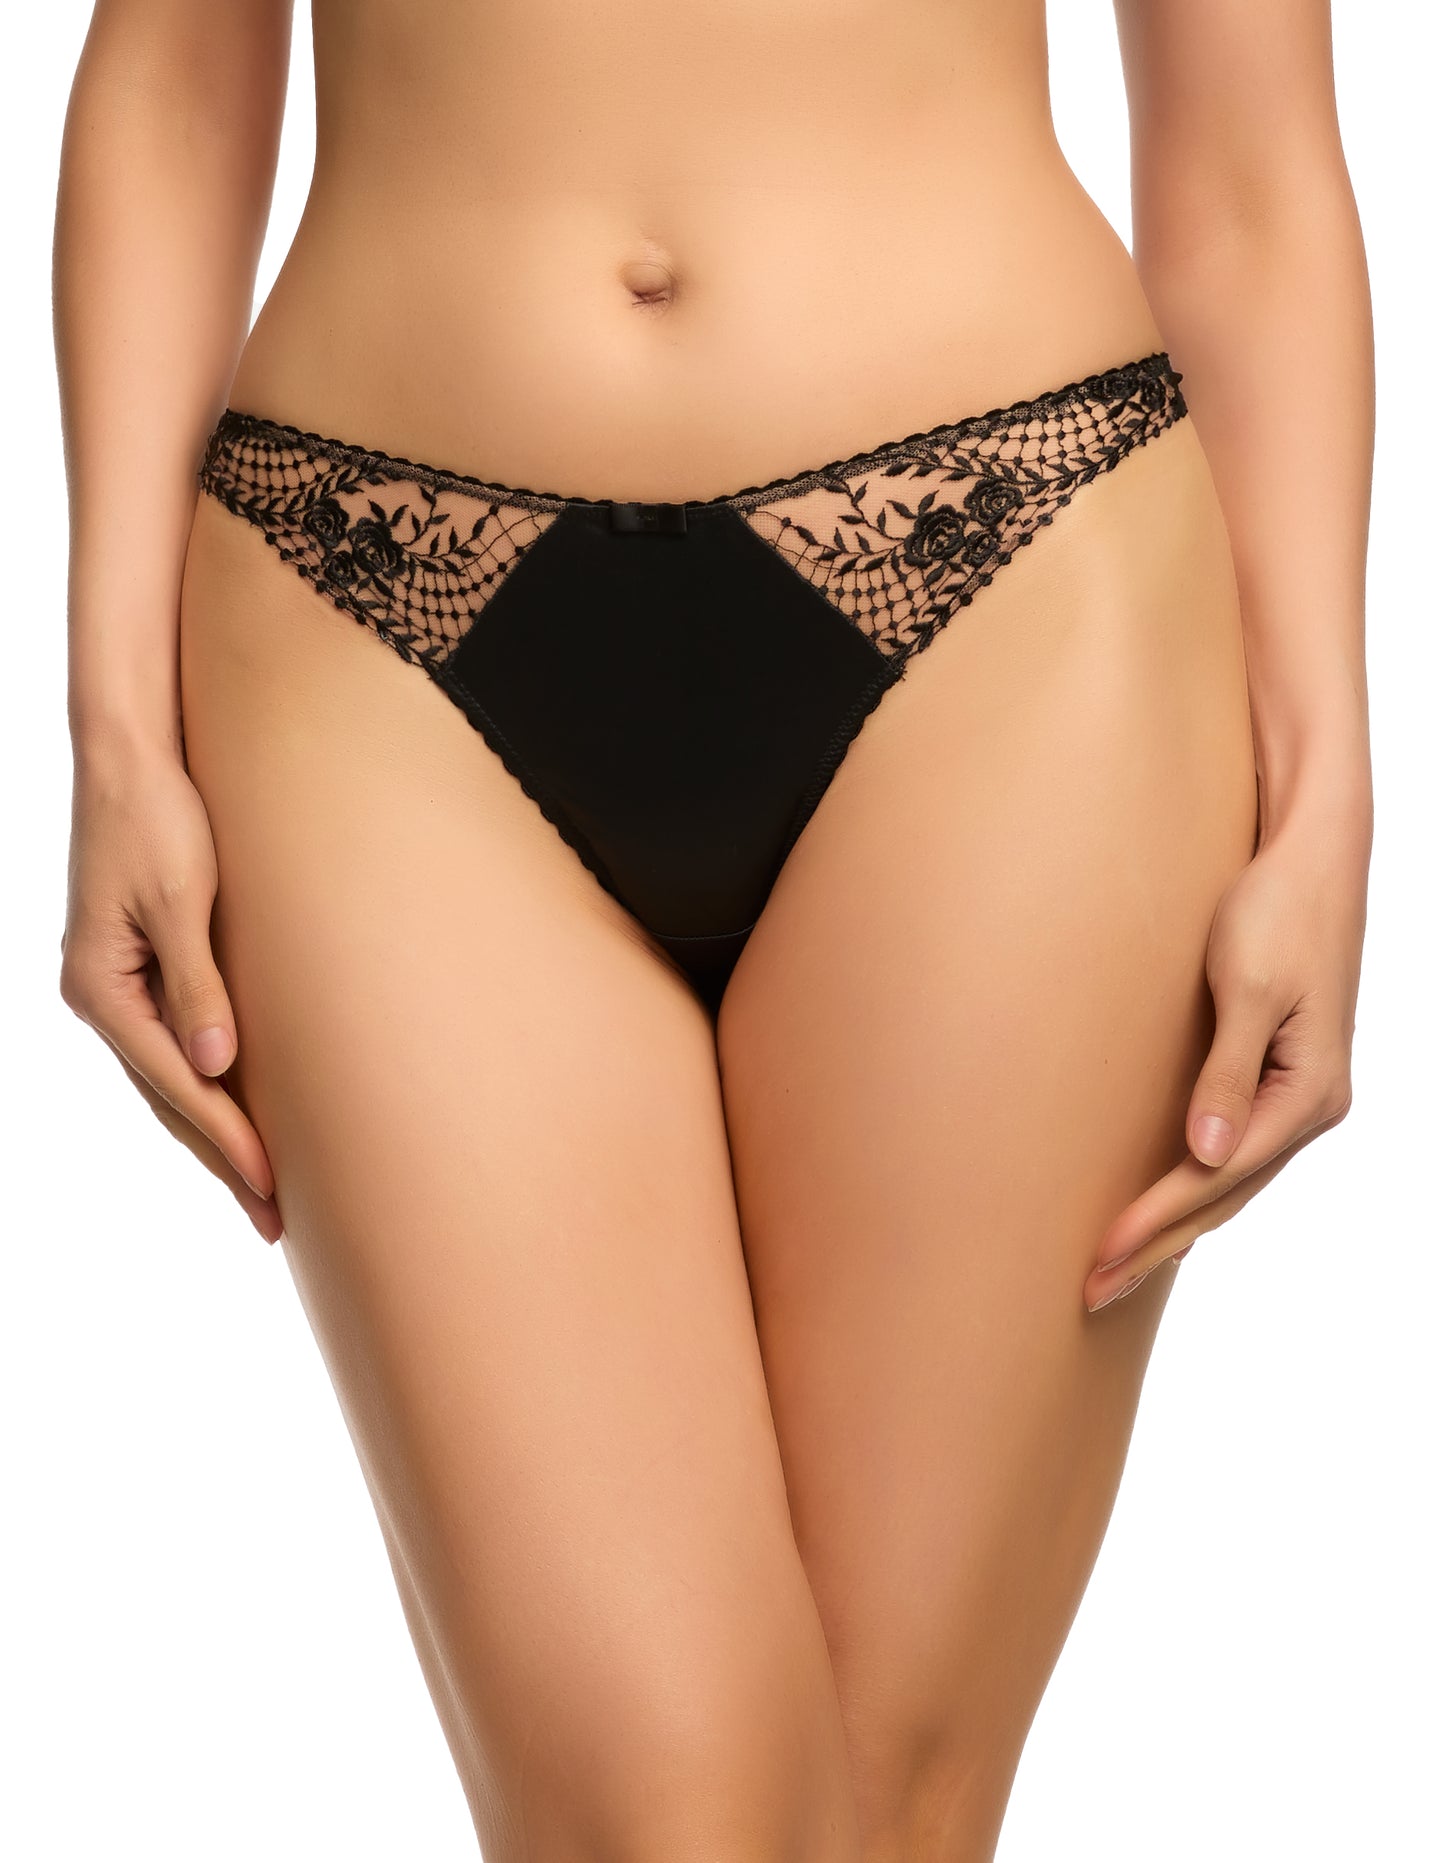 Julie's Roses Thong in Black By Dita Von Teese - sizes XS - L